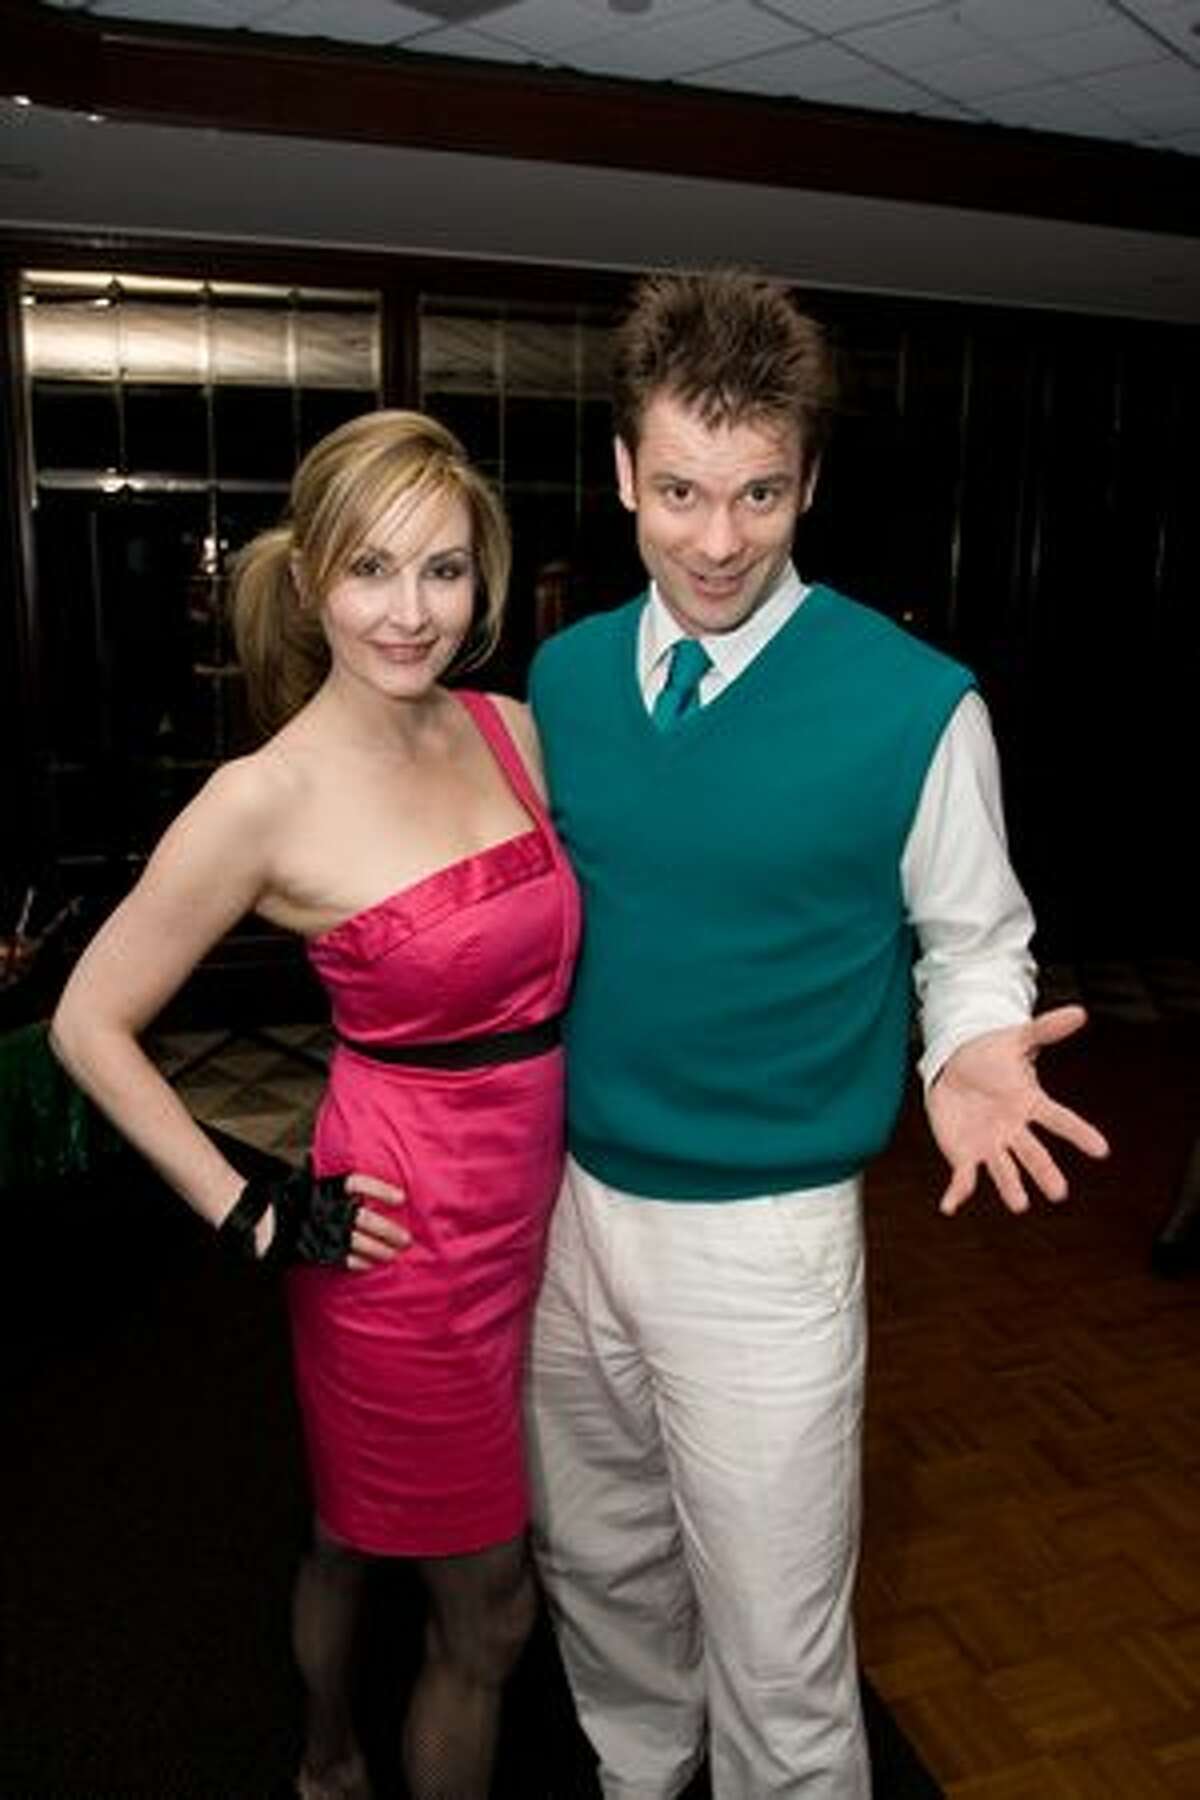 Dawn Hunter and Eric Valpy at the '80s Prom Night party at the Columbia Tower Club. (Humberto Martinez / seattlepi.com)